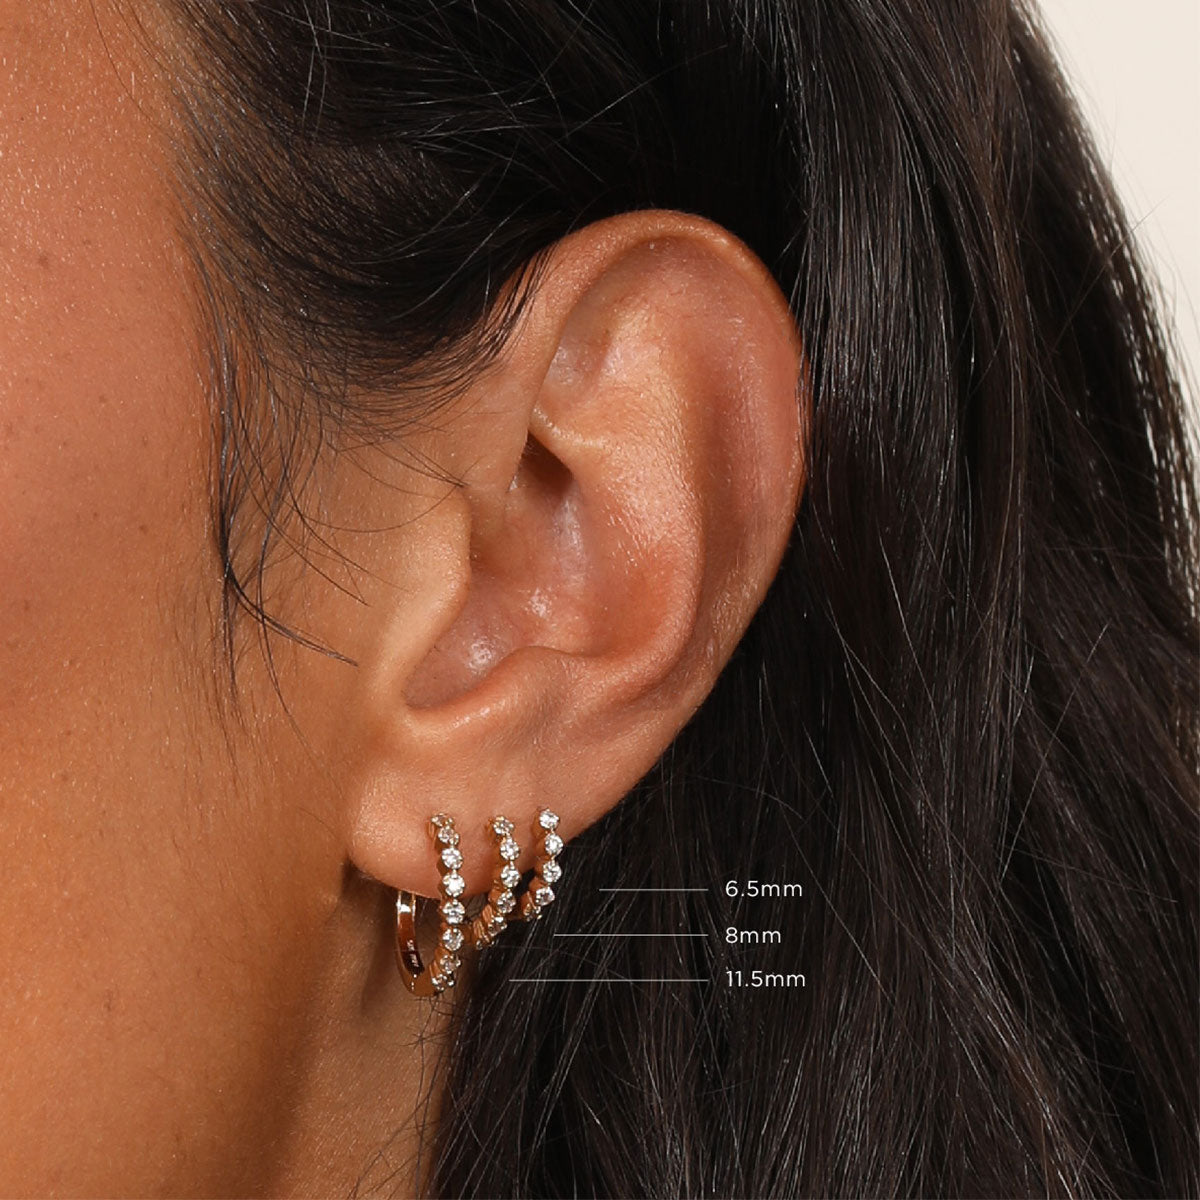 Illume Crystal 6.5mm, 8mm, 11.5mm Hoops in Gold worn